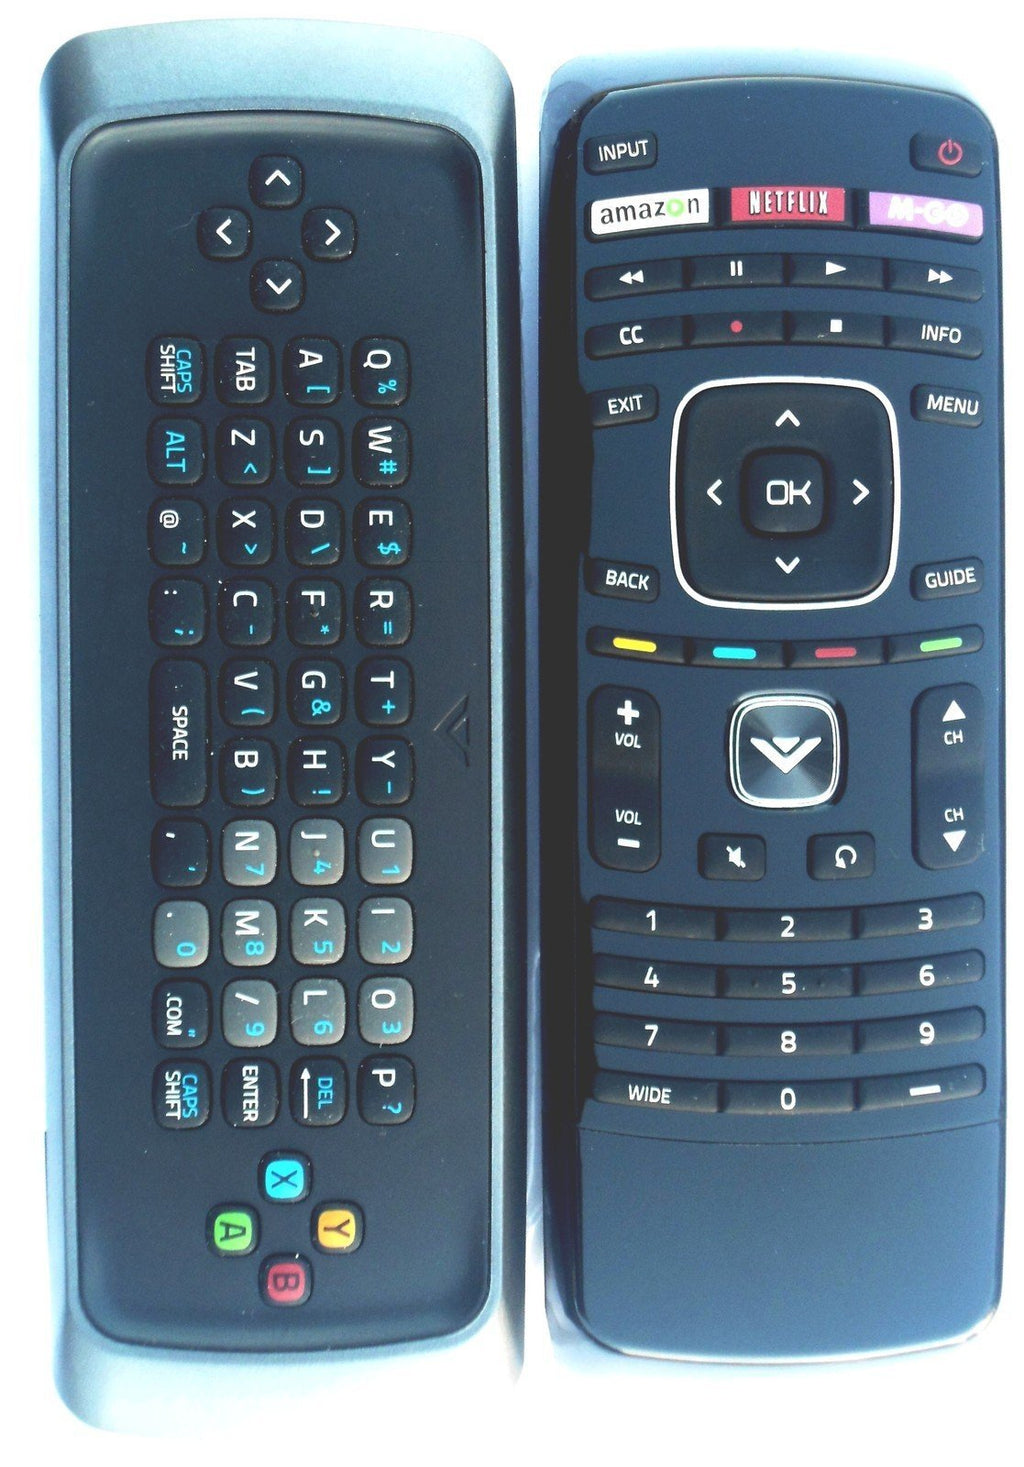 New Dual Side Keyboard Internet Remote for M420SV M470SV M550SV M420SL M470SL M550SL M370SR M420SR M420KD E551VA E601i-A3